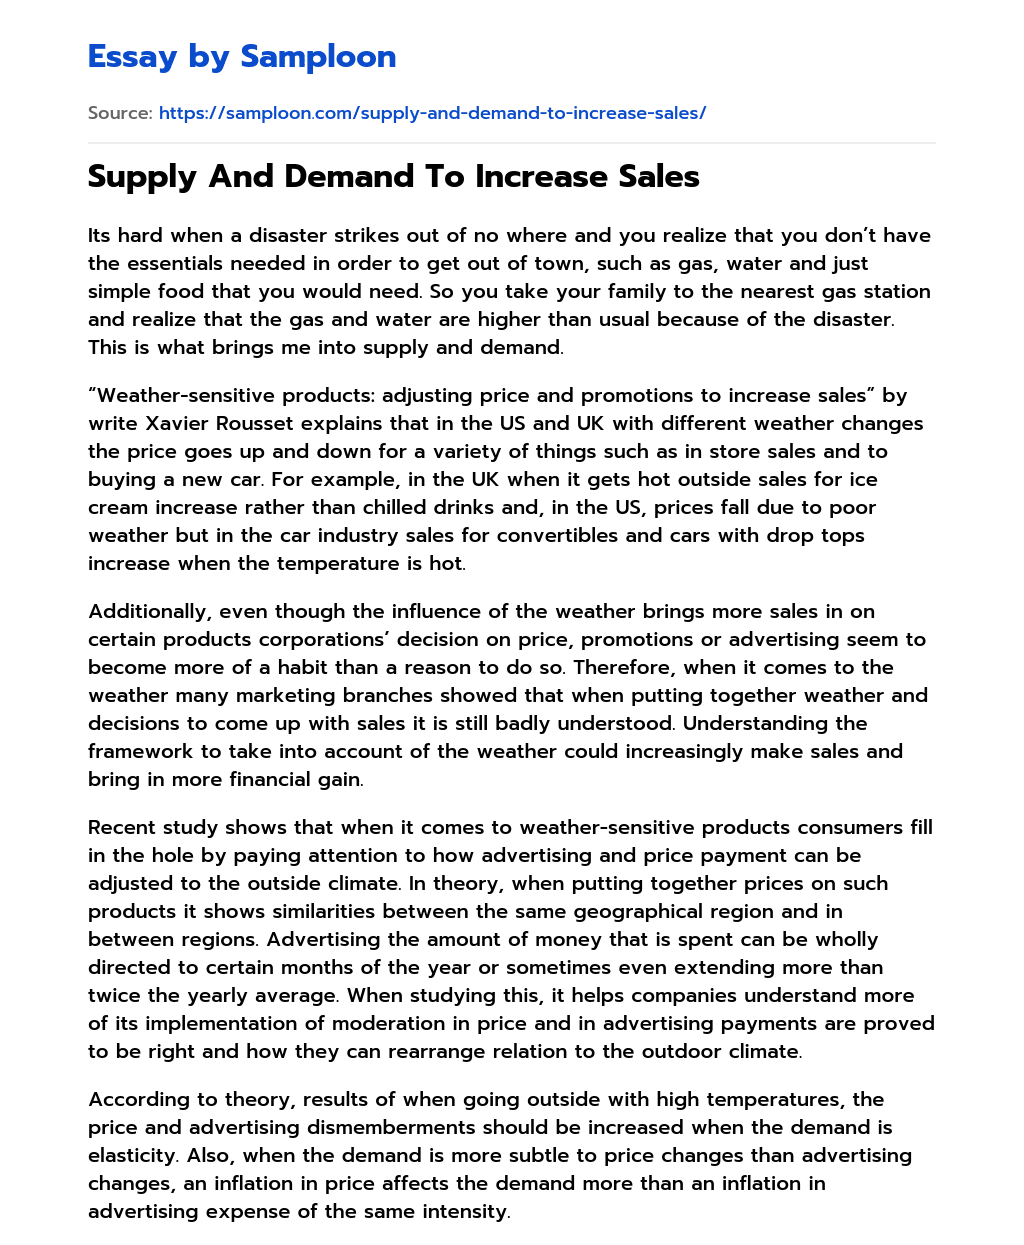 Supply And Demand To Increase Sales essay